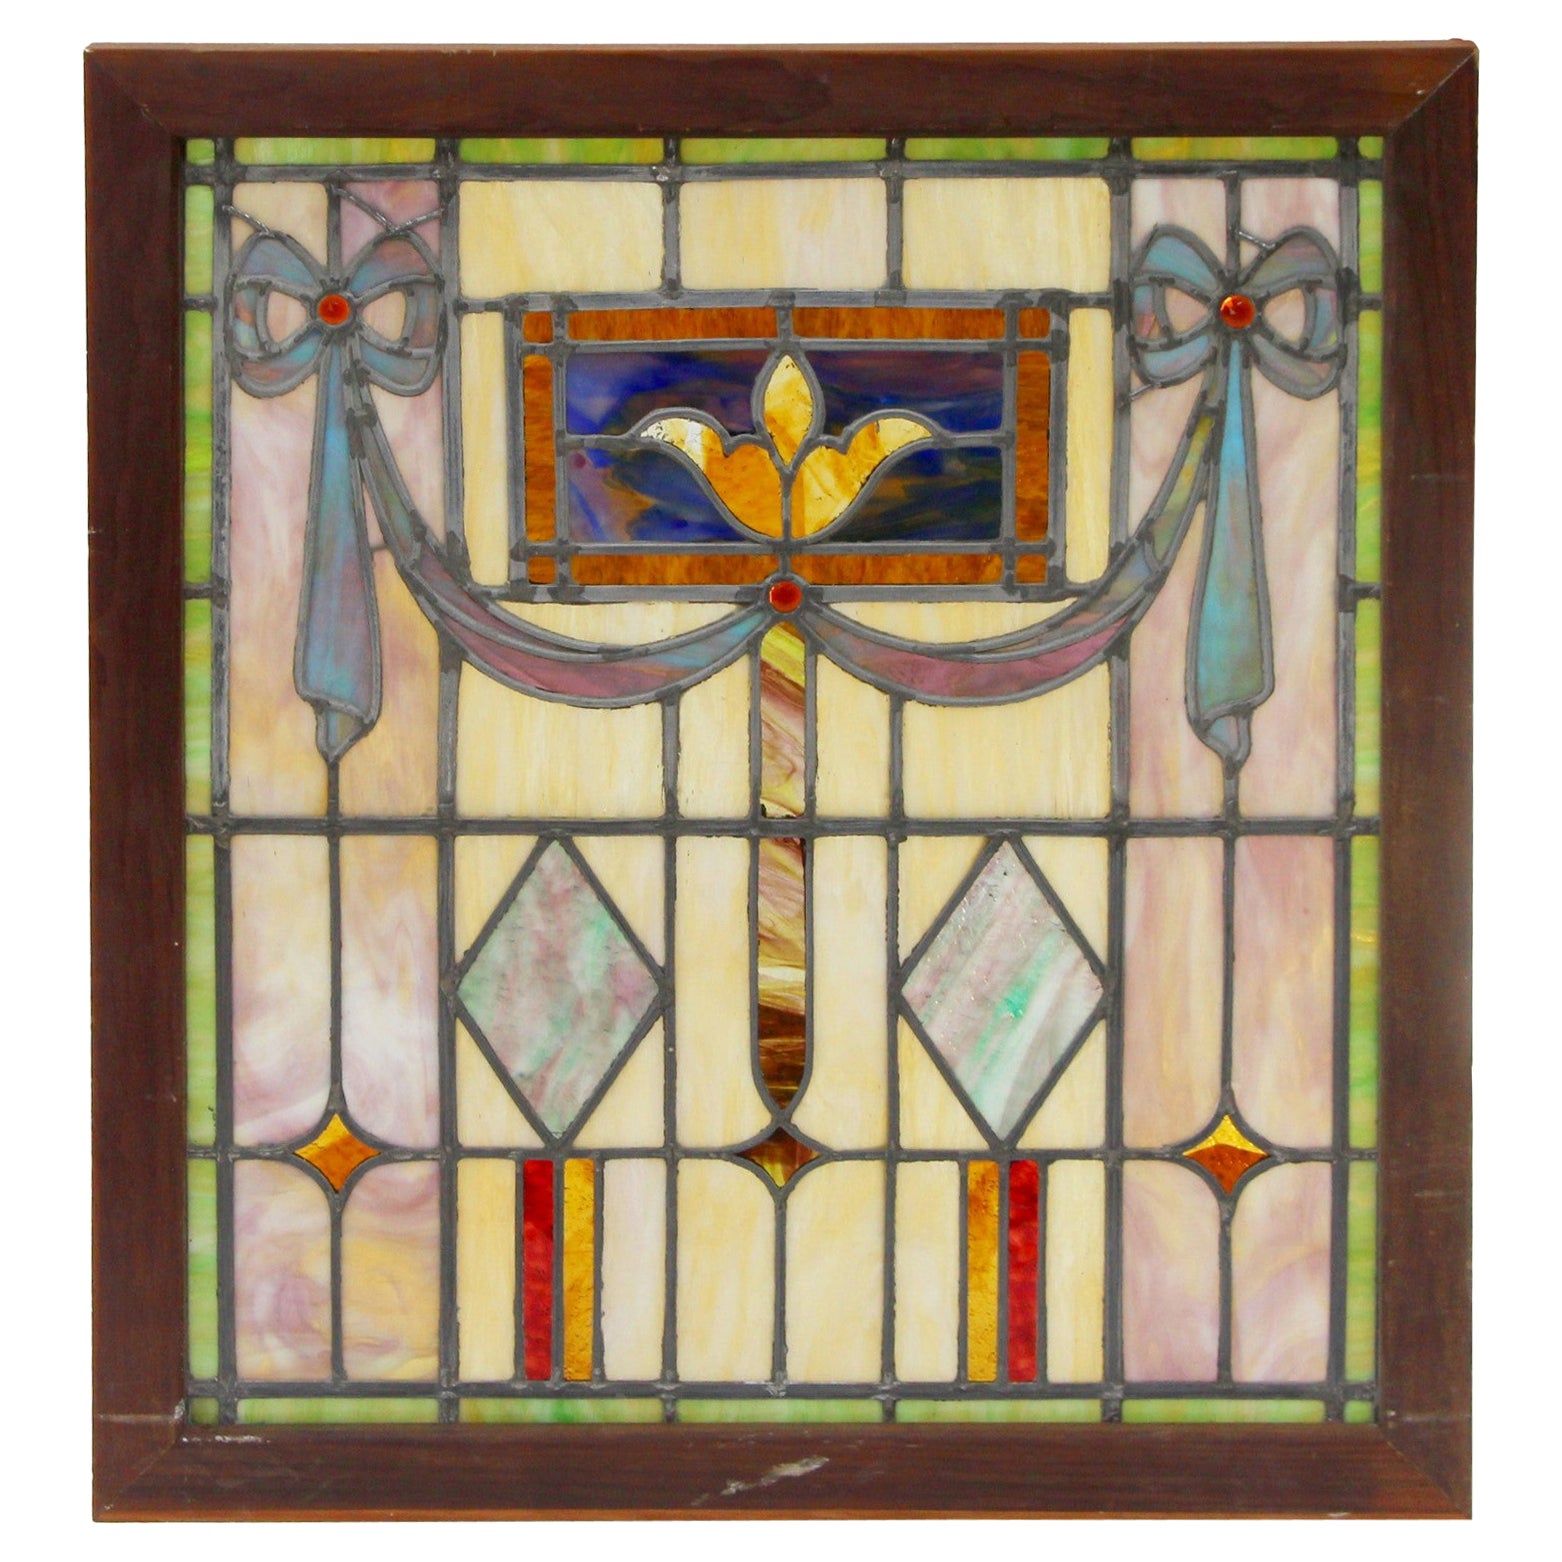 1890 Victorian Stained Glass Window with Jewels & Vibrant Colors